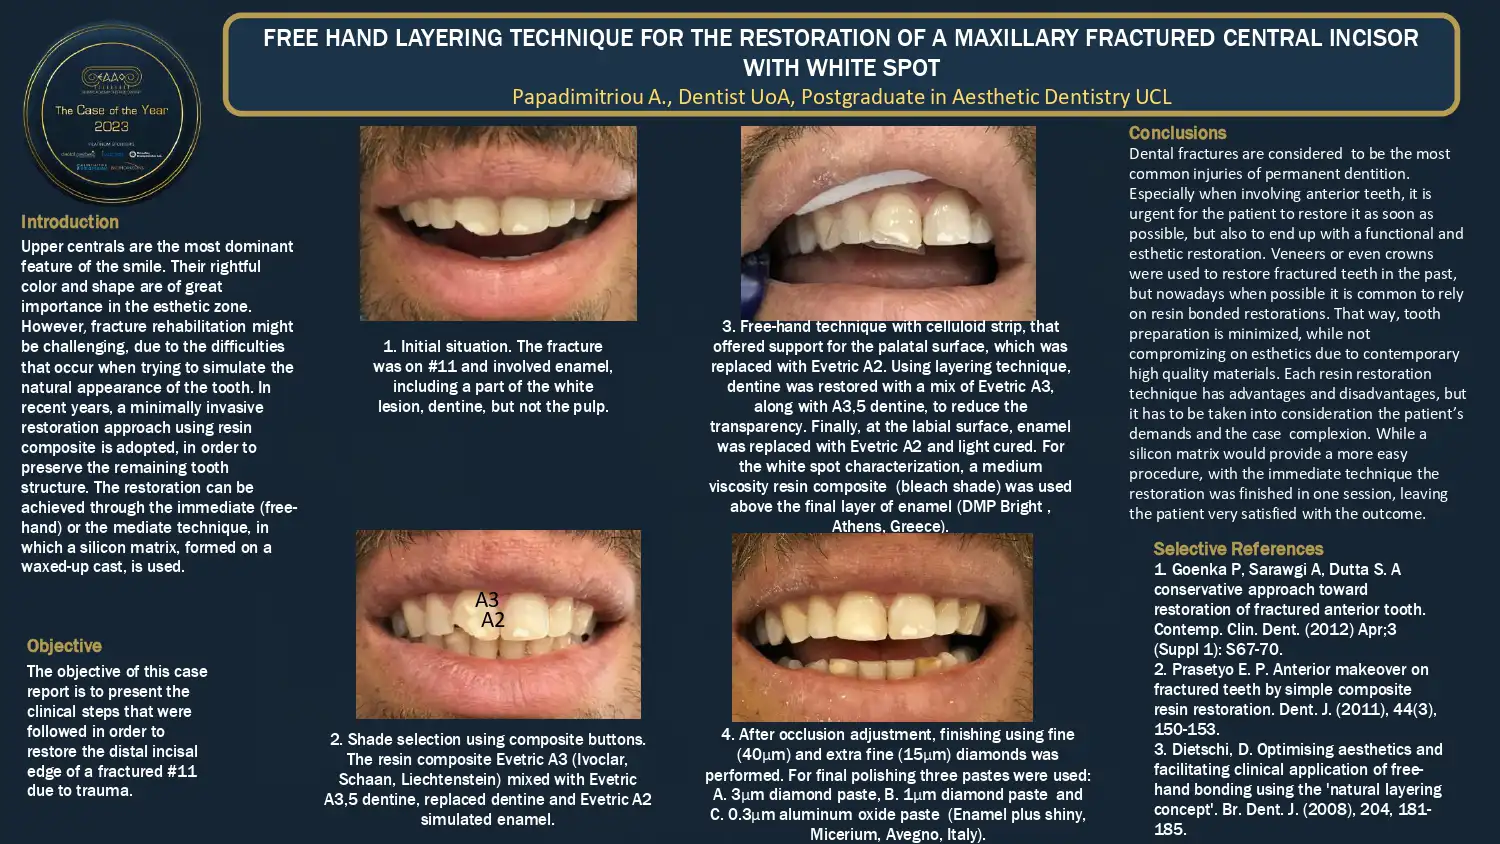 Free hand layering technique for the restoration of a maxillary fractured central incisor with white spot.